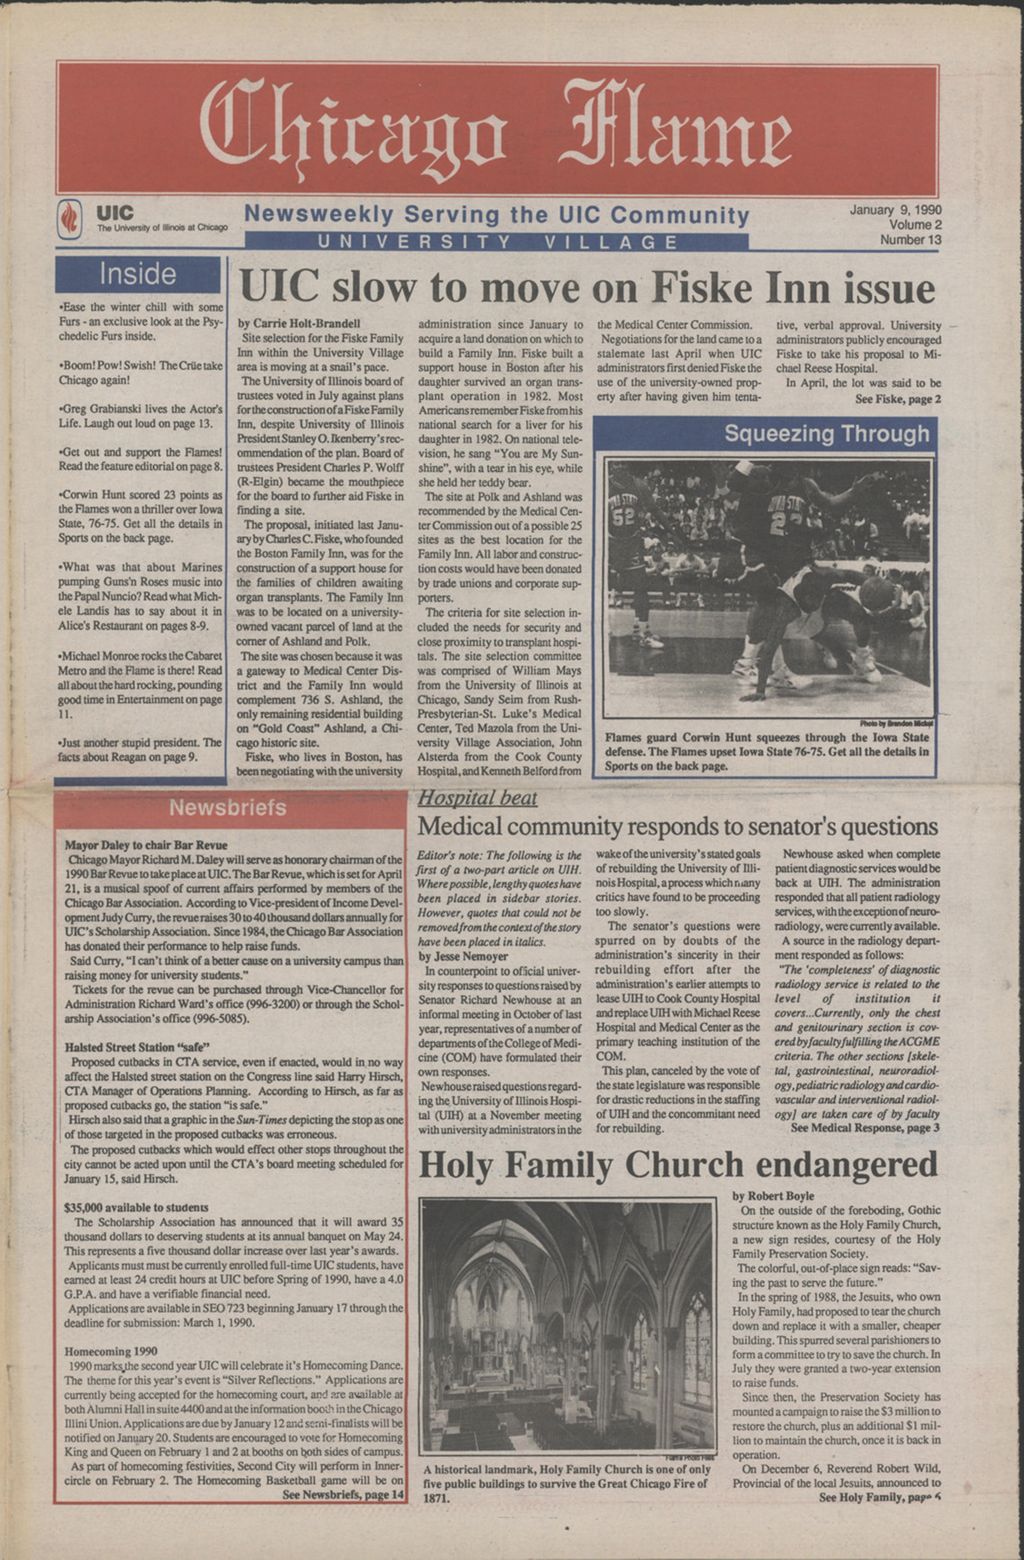 Chicago Flame (January 9, 1990)